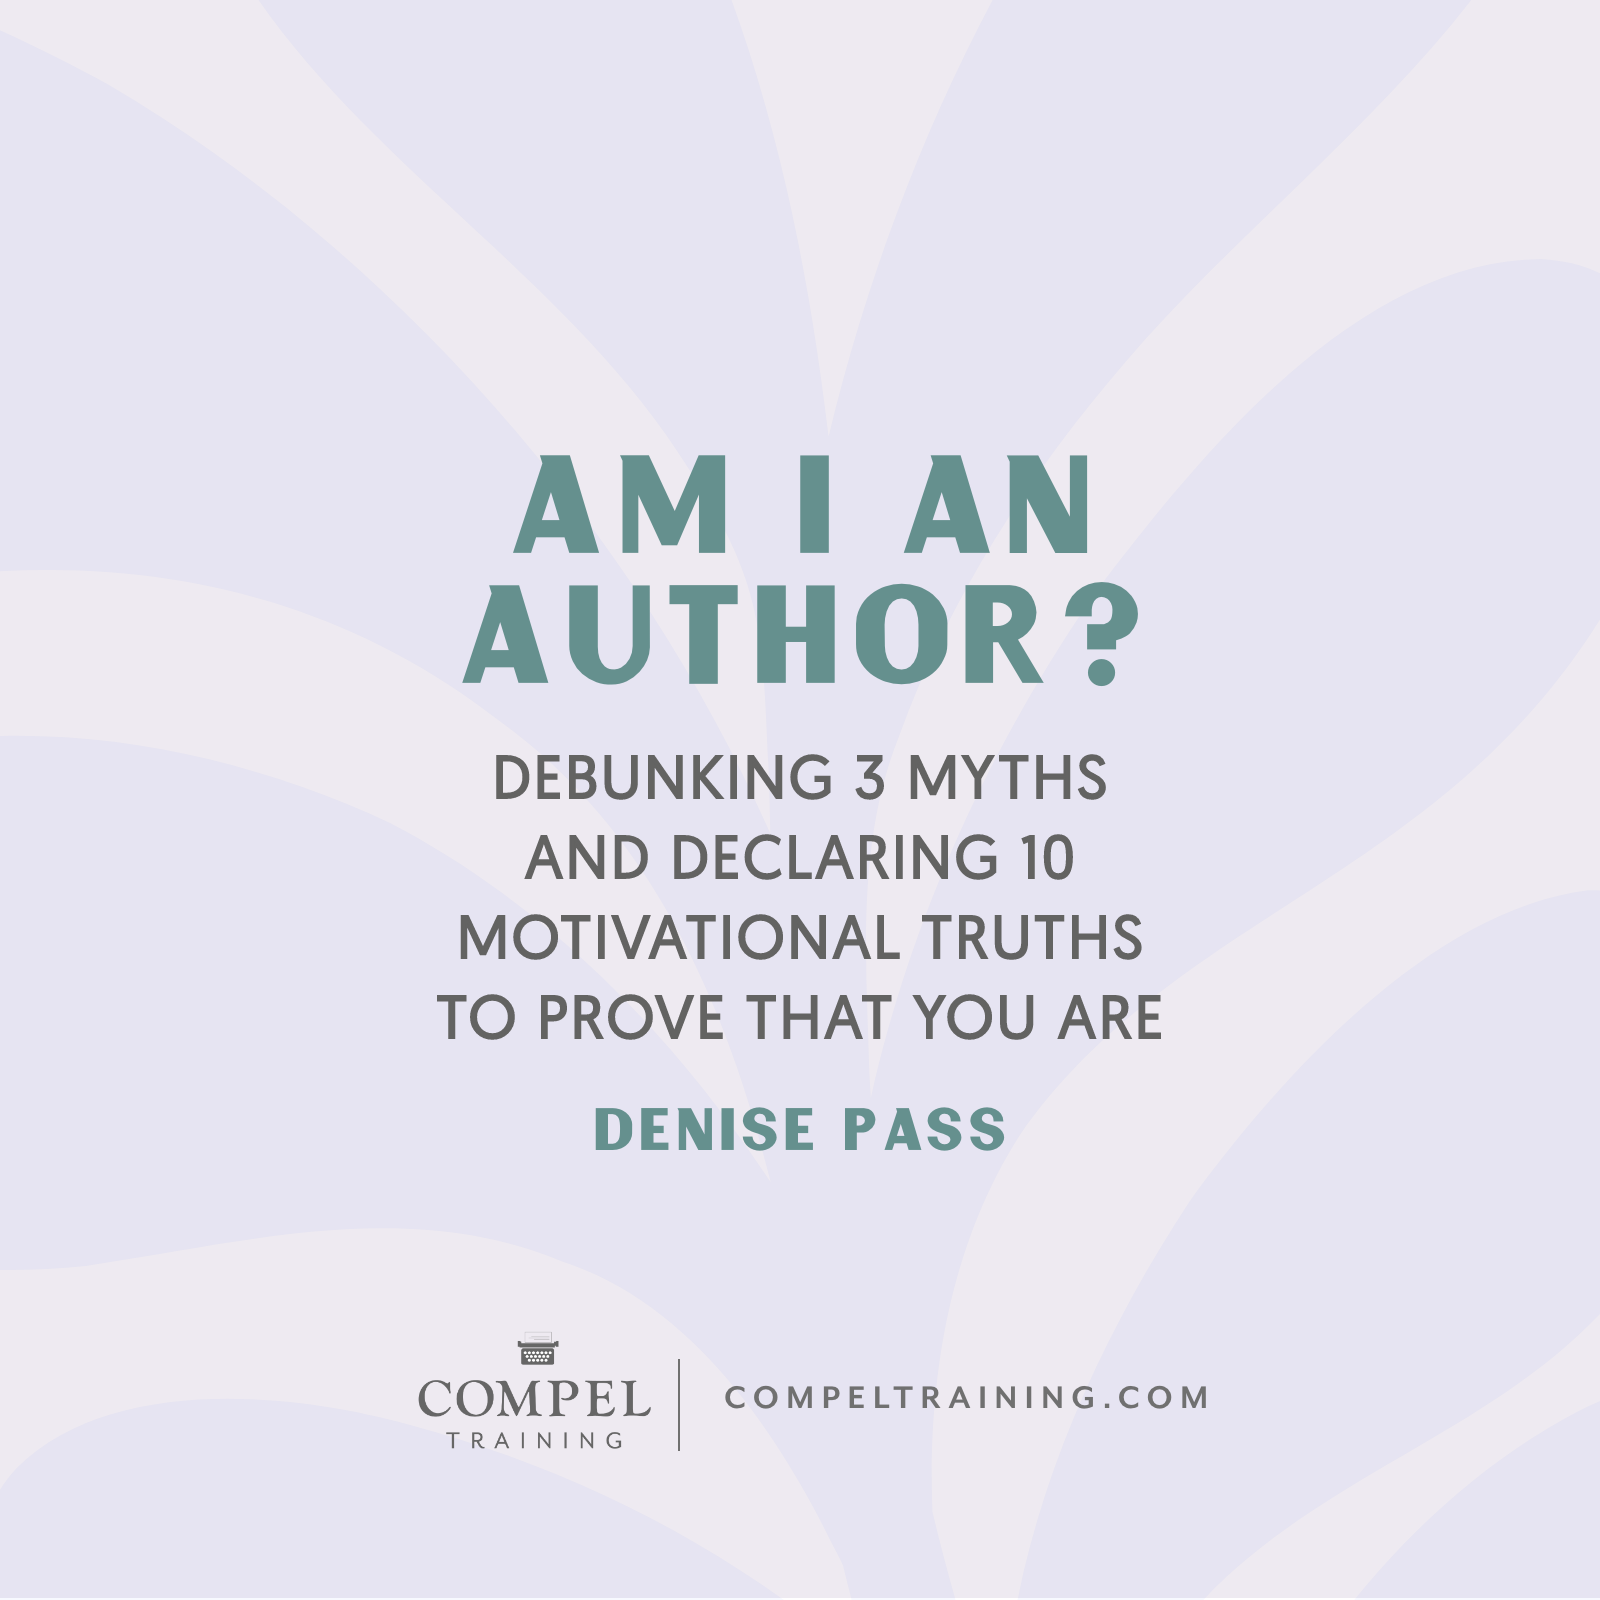 Am I an Author? Debunking 3 Myths and Declaring 10 Motivational Truths To Prove That You Are